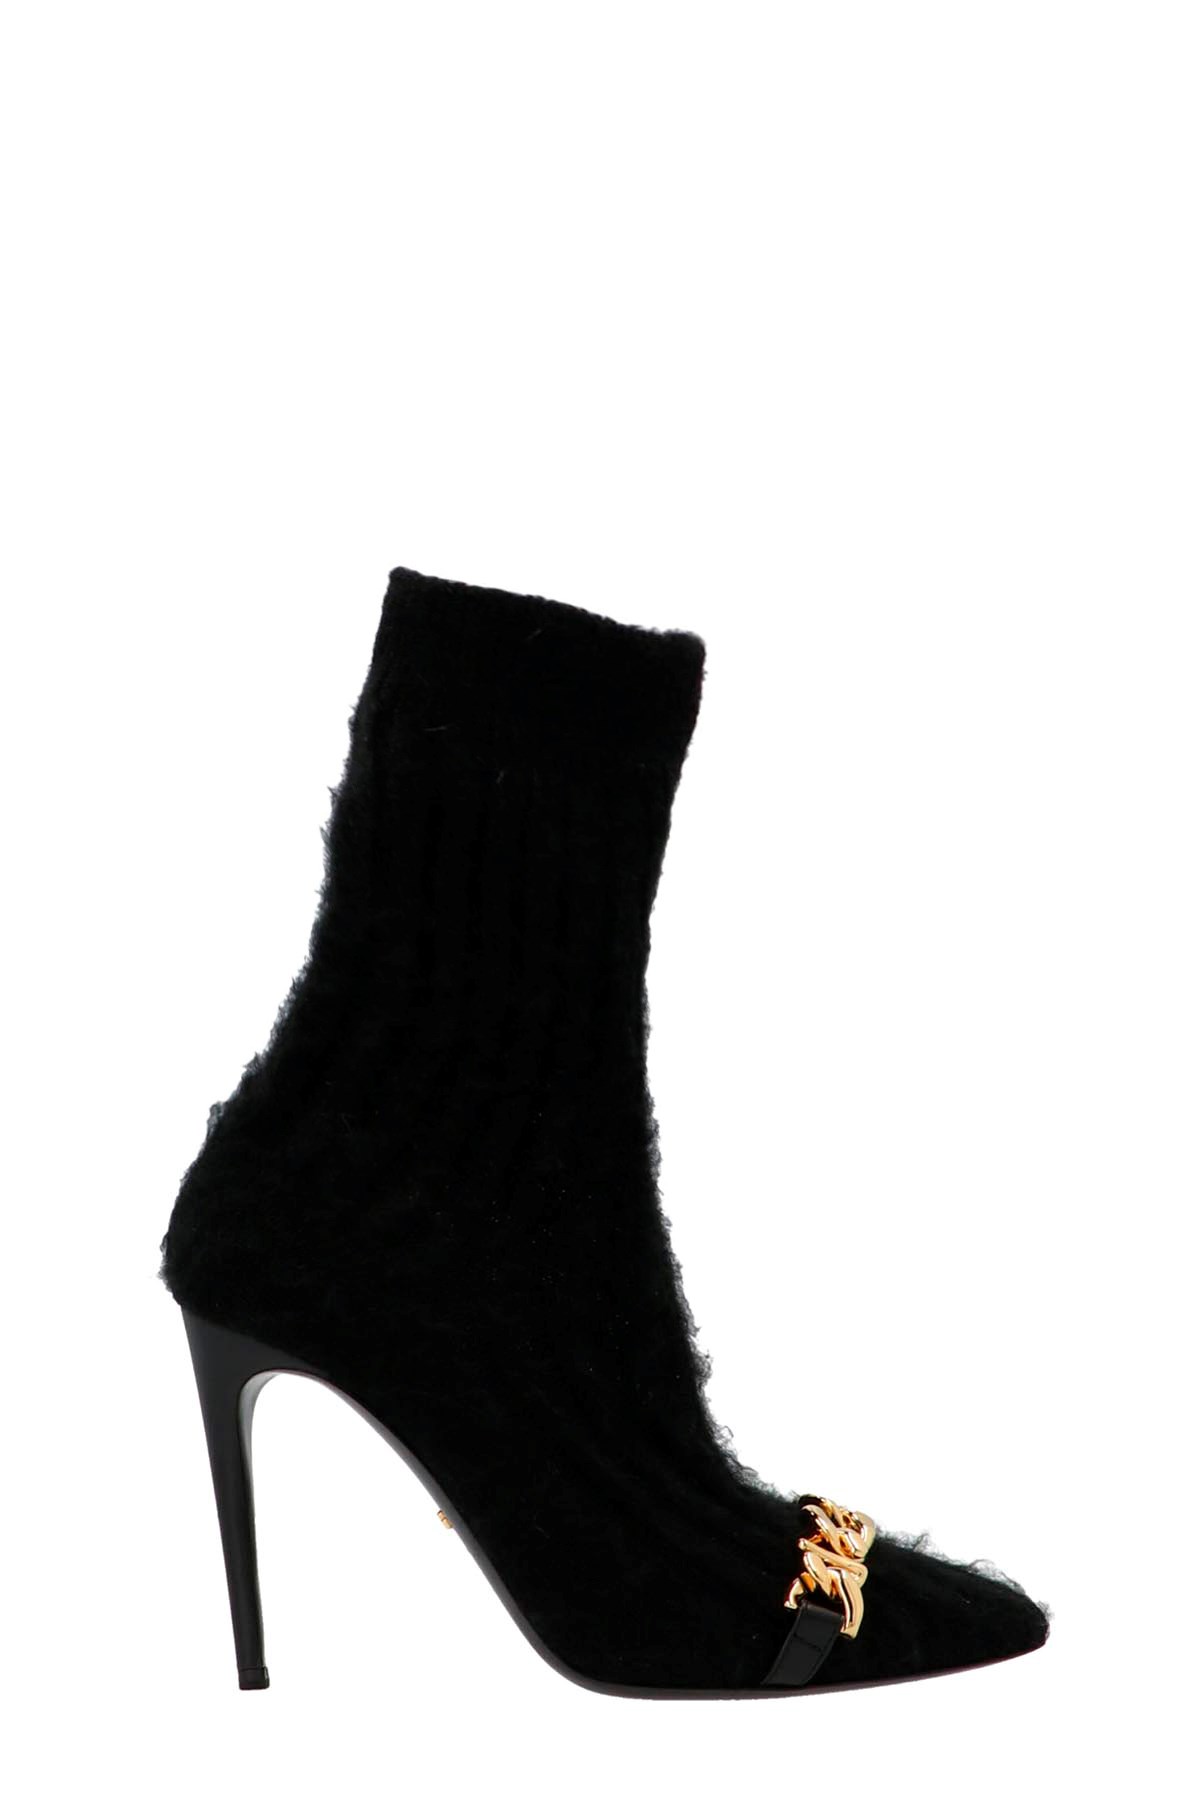 GCDS 'Chain’ Ankle Boots